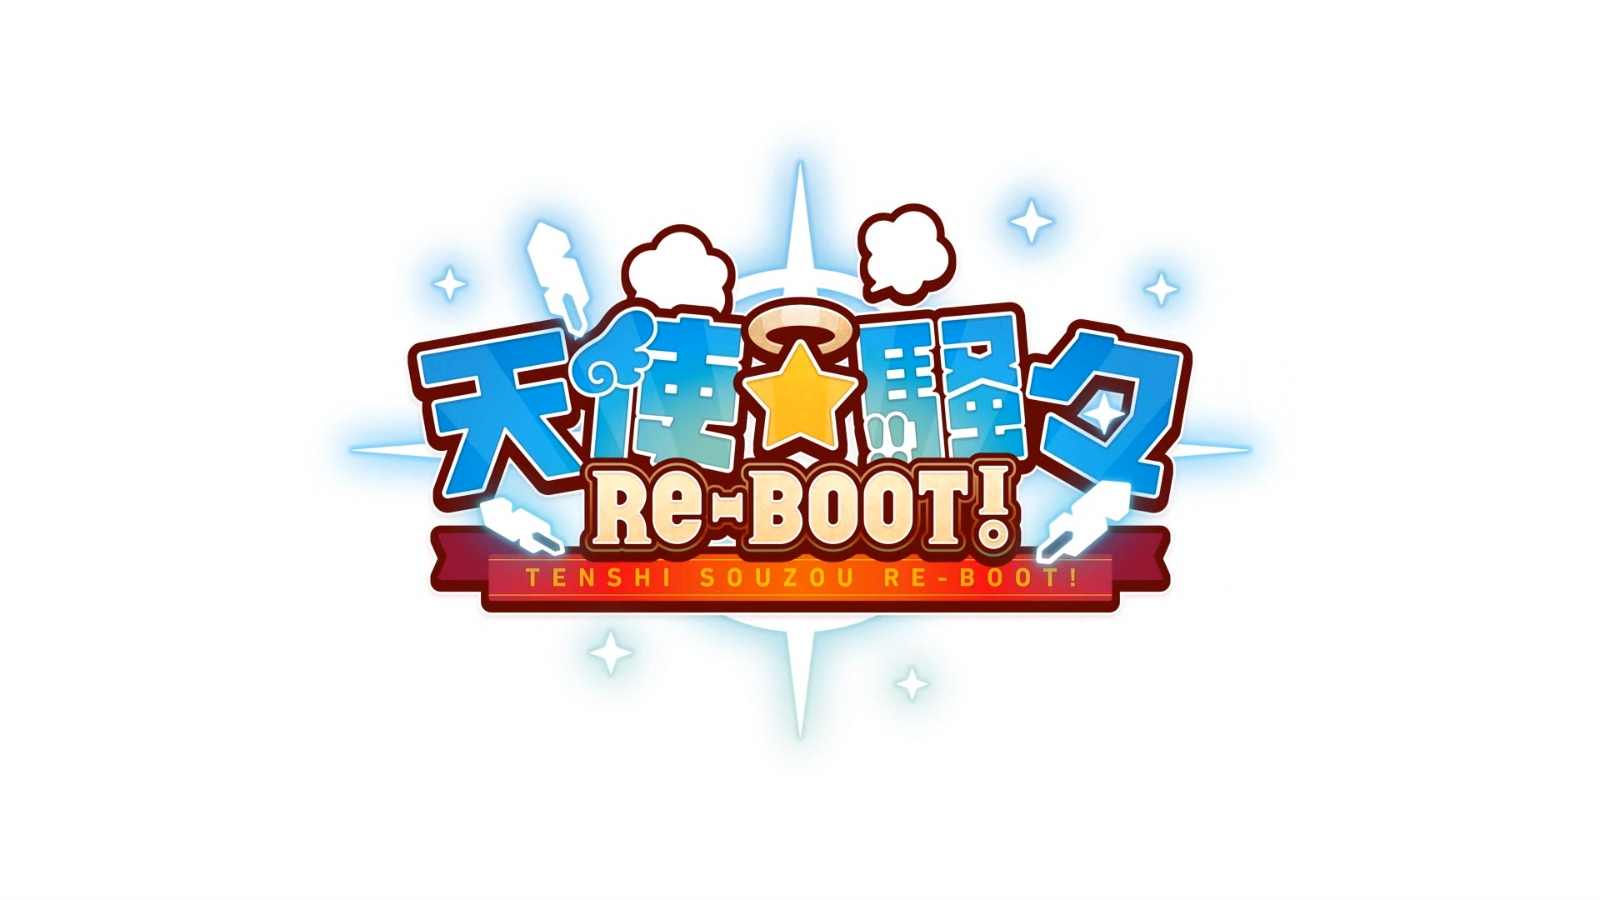 ʹRE-BOOT!